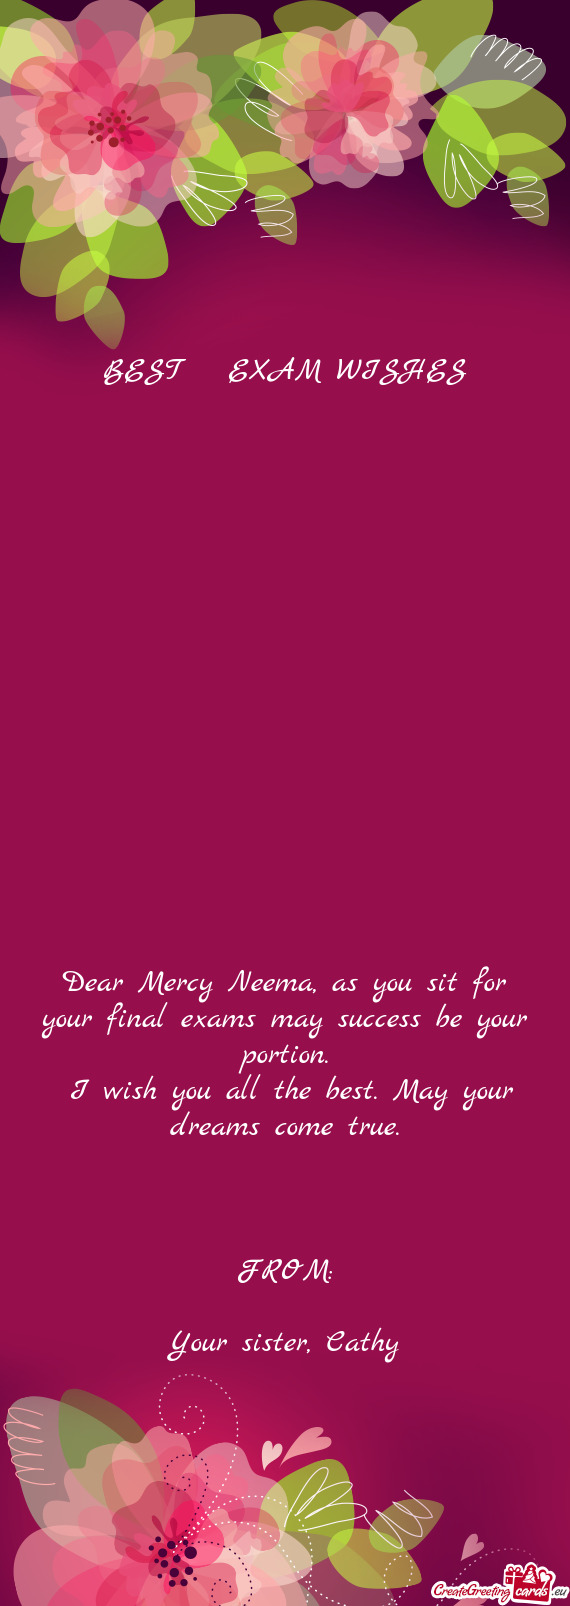 Dear Mercy Neema, as you sit for your final exams may success be your portion